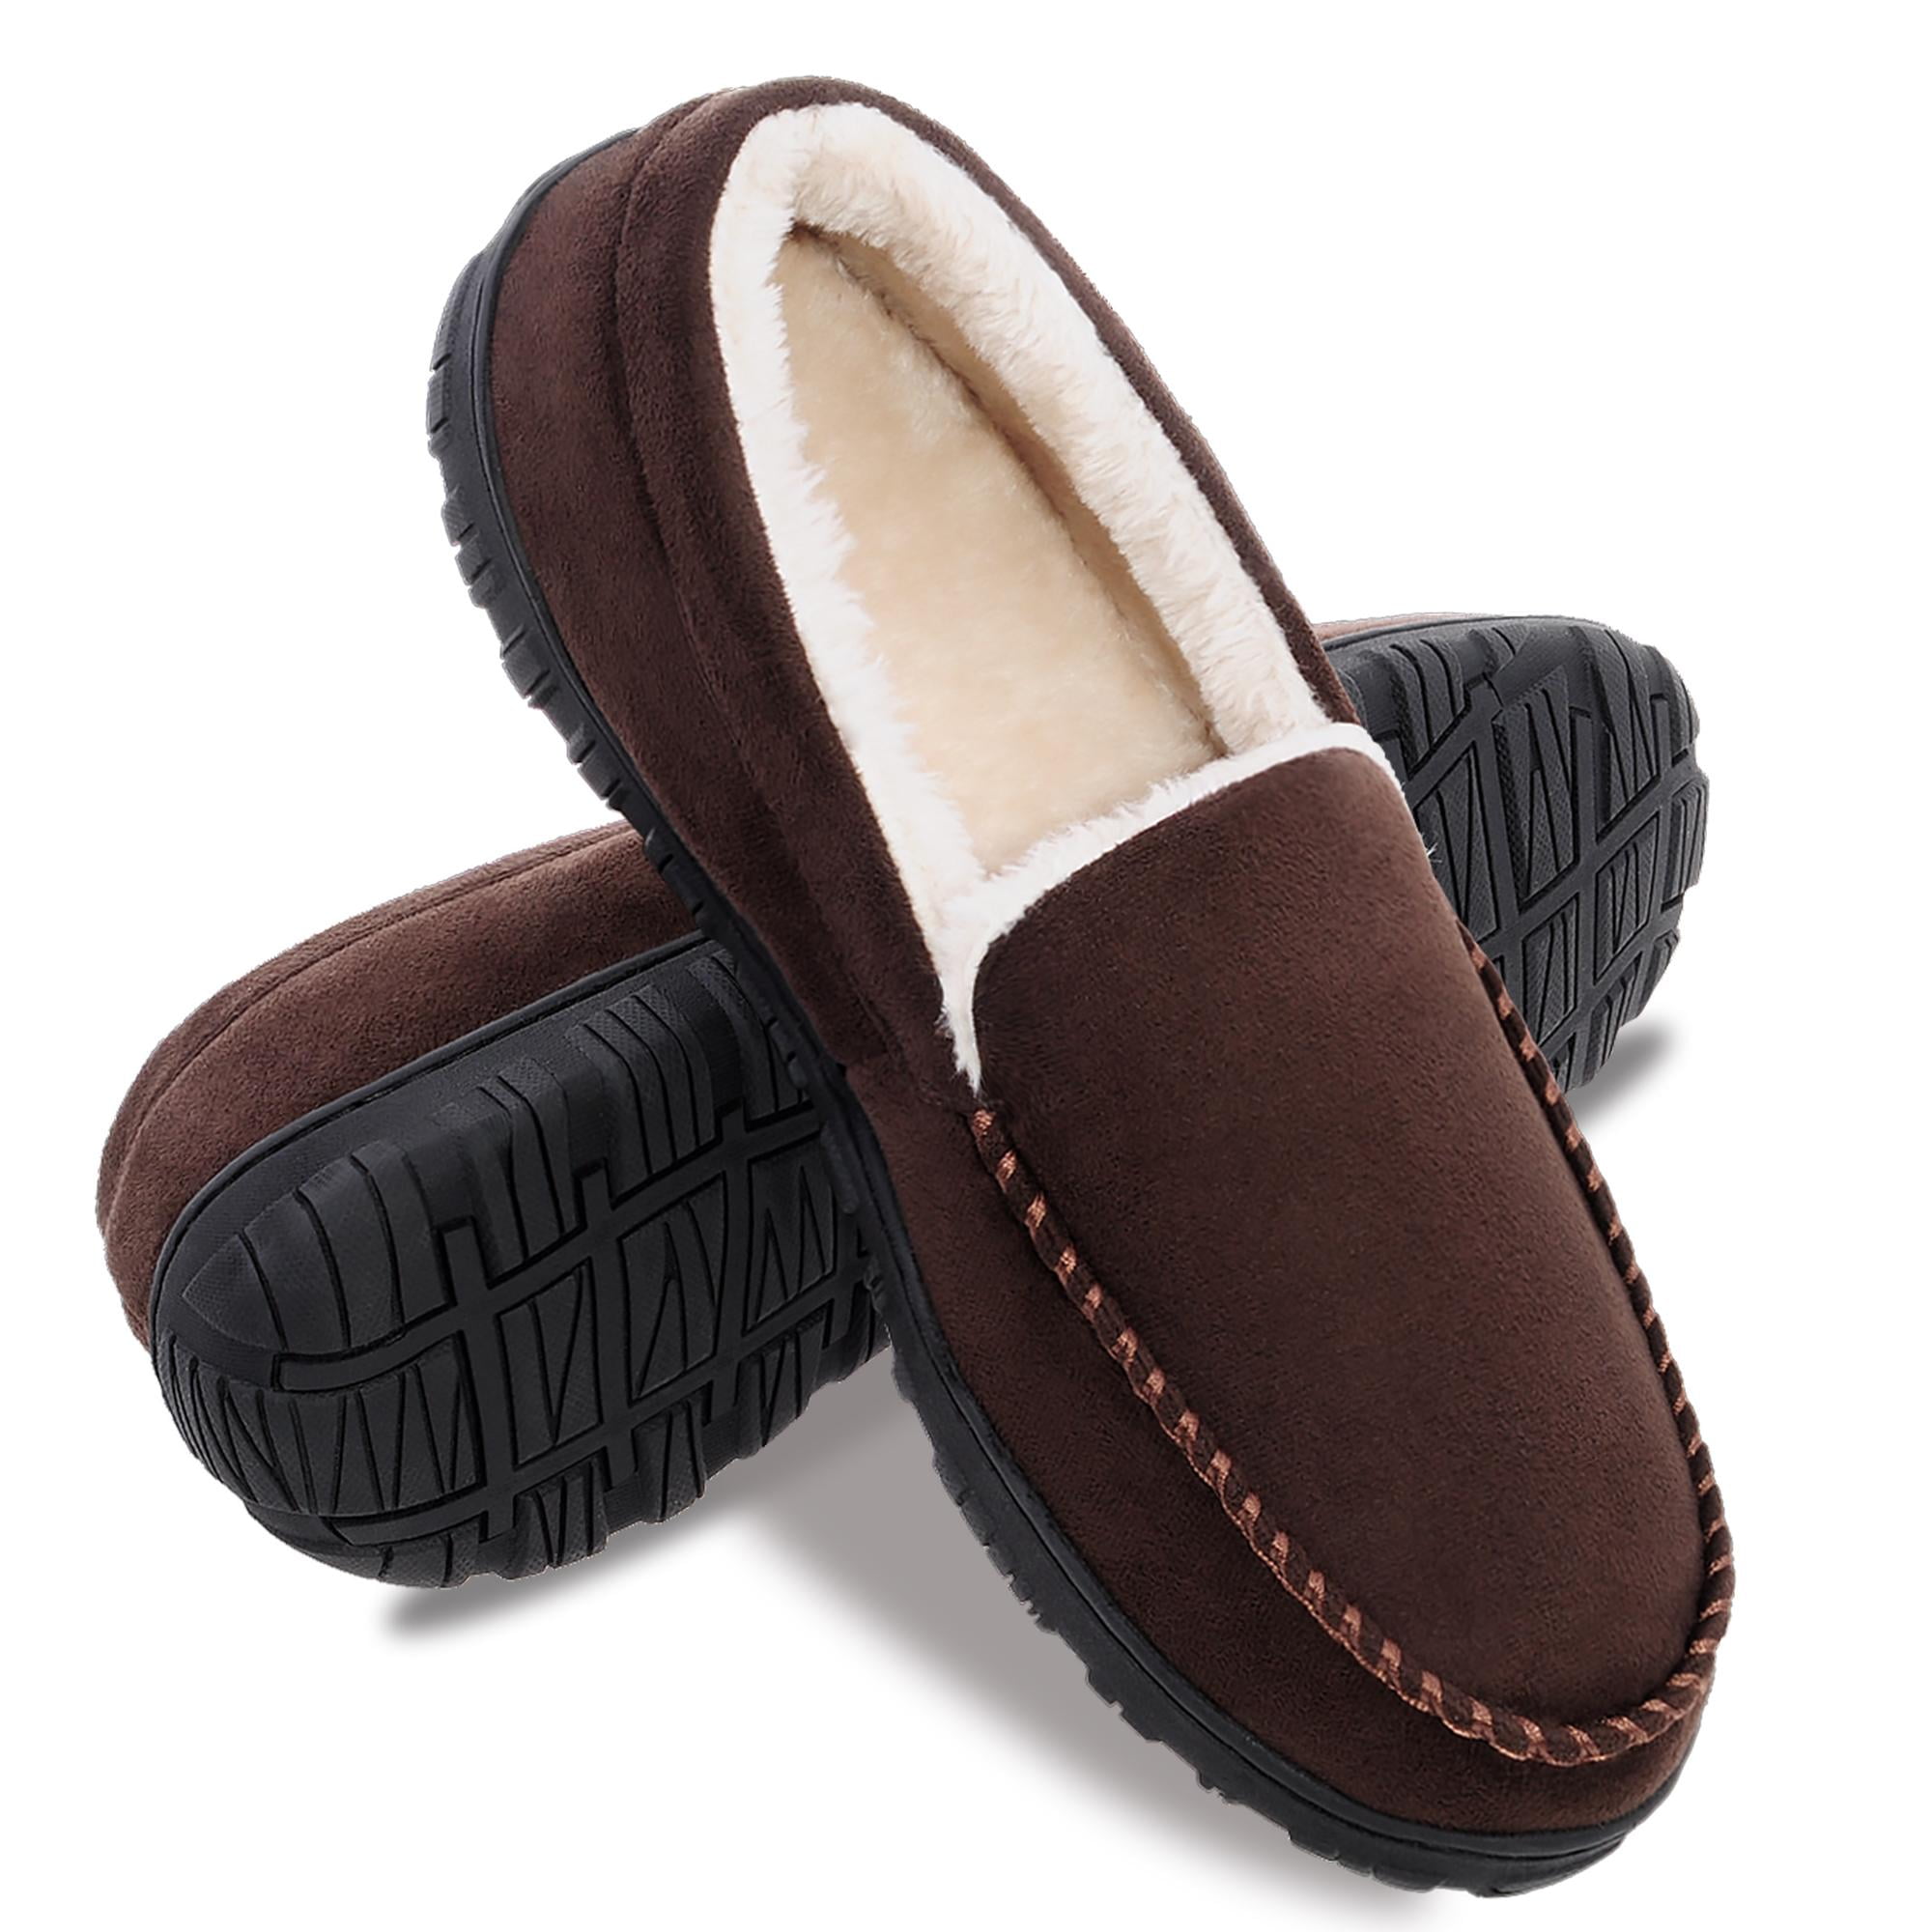 EverFoams Men's Moccasin Cotton Knit House Slippers with Removable Insole 